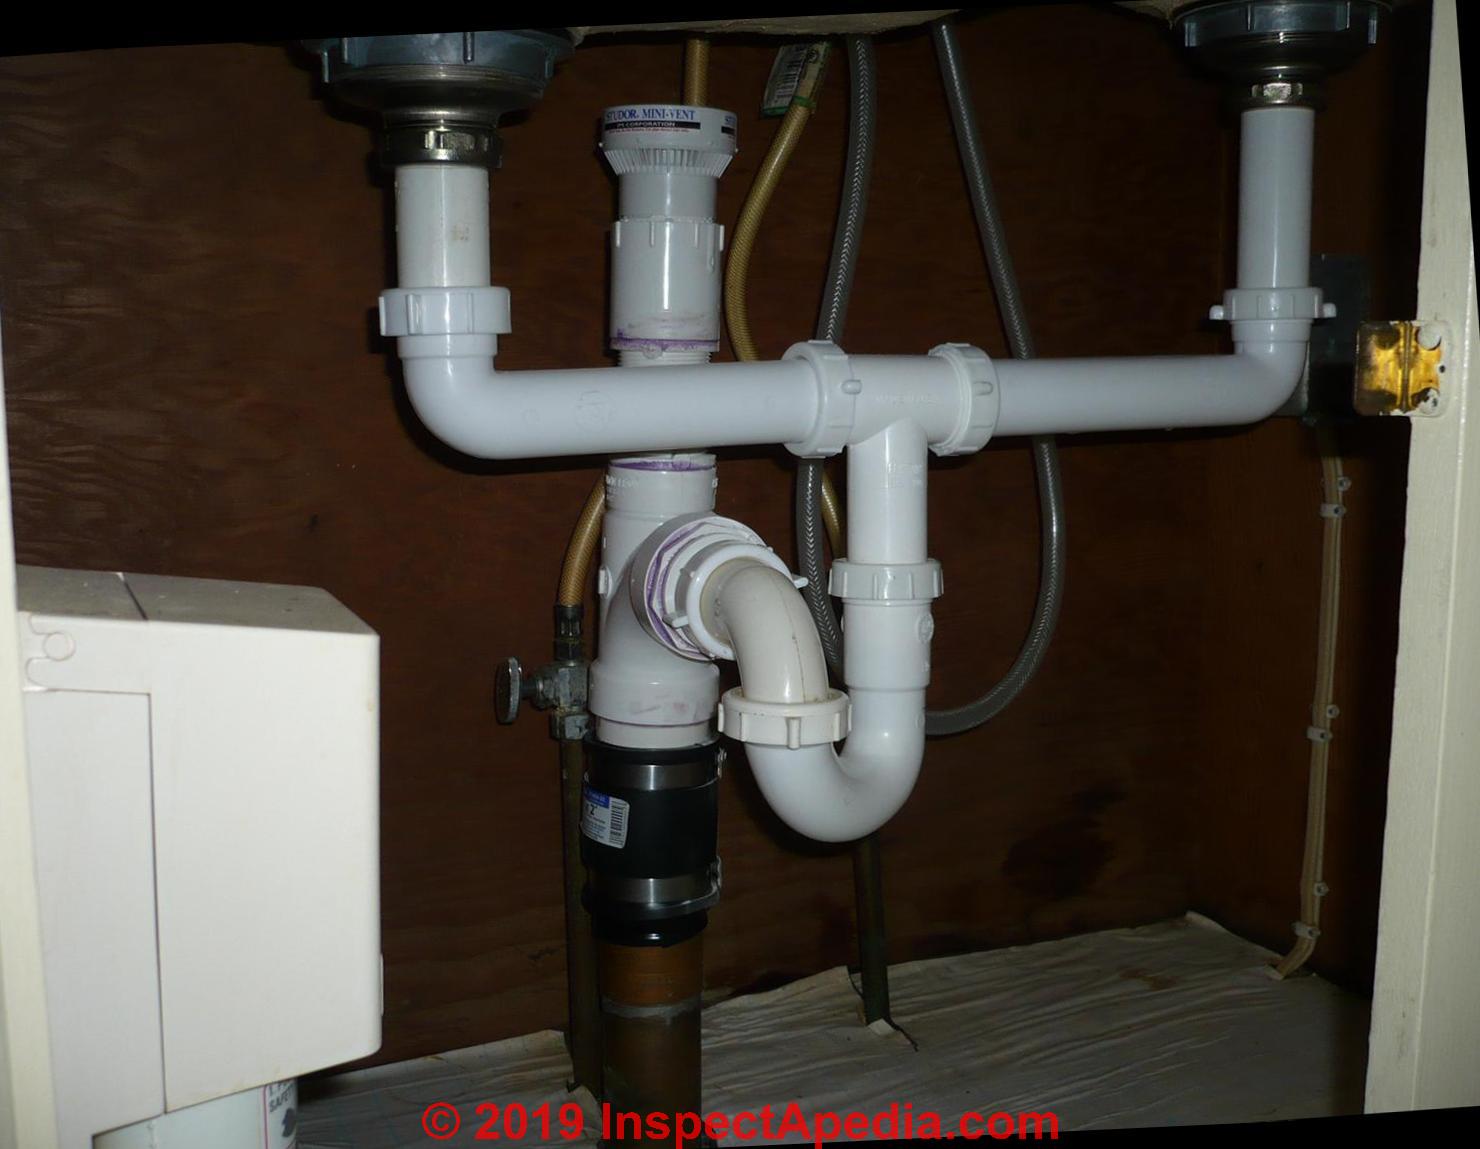 How To Install A Studor Vent For A Kitchen Sink Air Admittance Valve AAV Troubleshooting AAV Repairs: Slow drains, noises,  test procedure